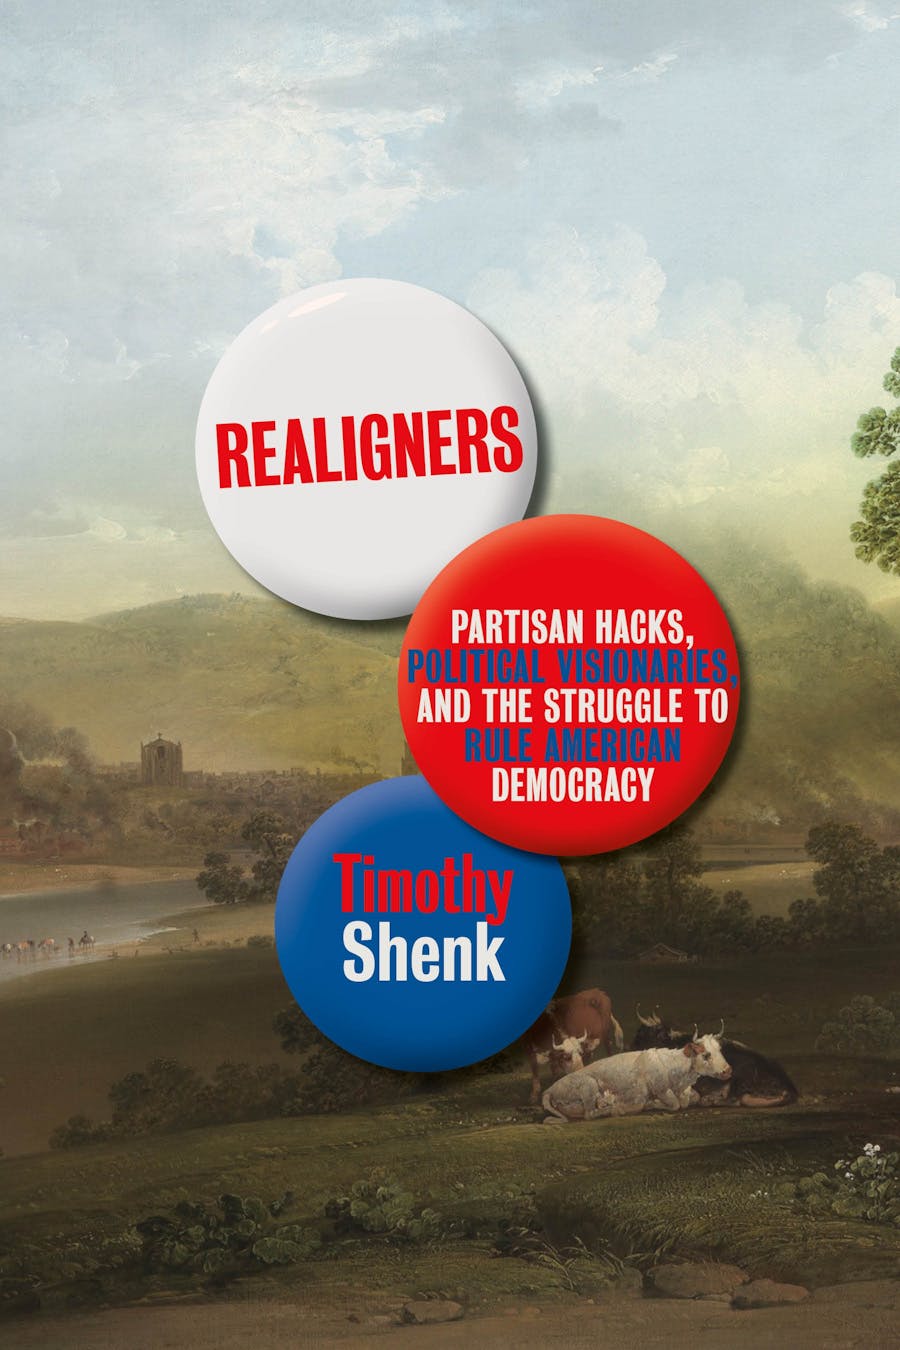 Realigners: Partisan Hacks, Political Visionaries, and the Struggle to Rule American Democracy